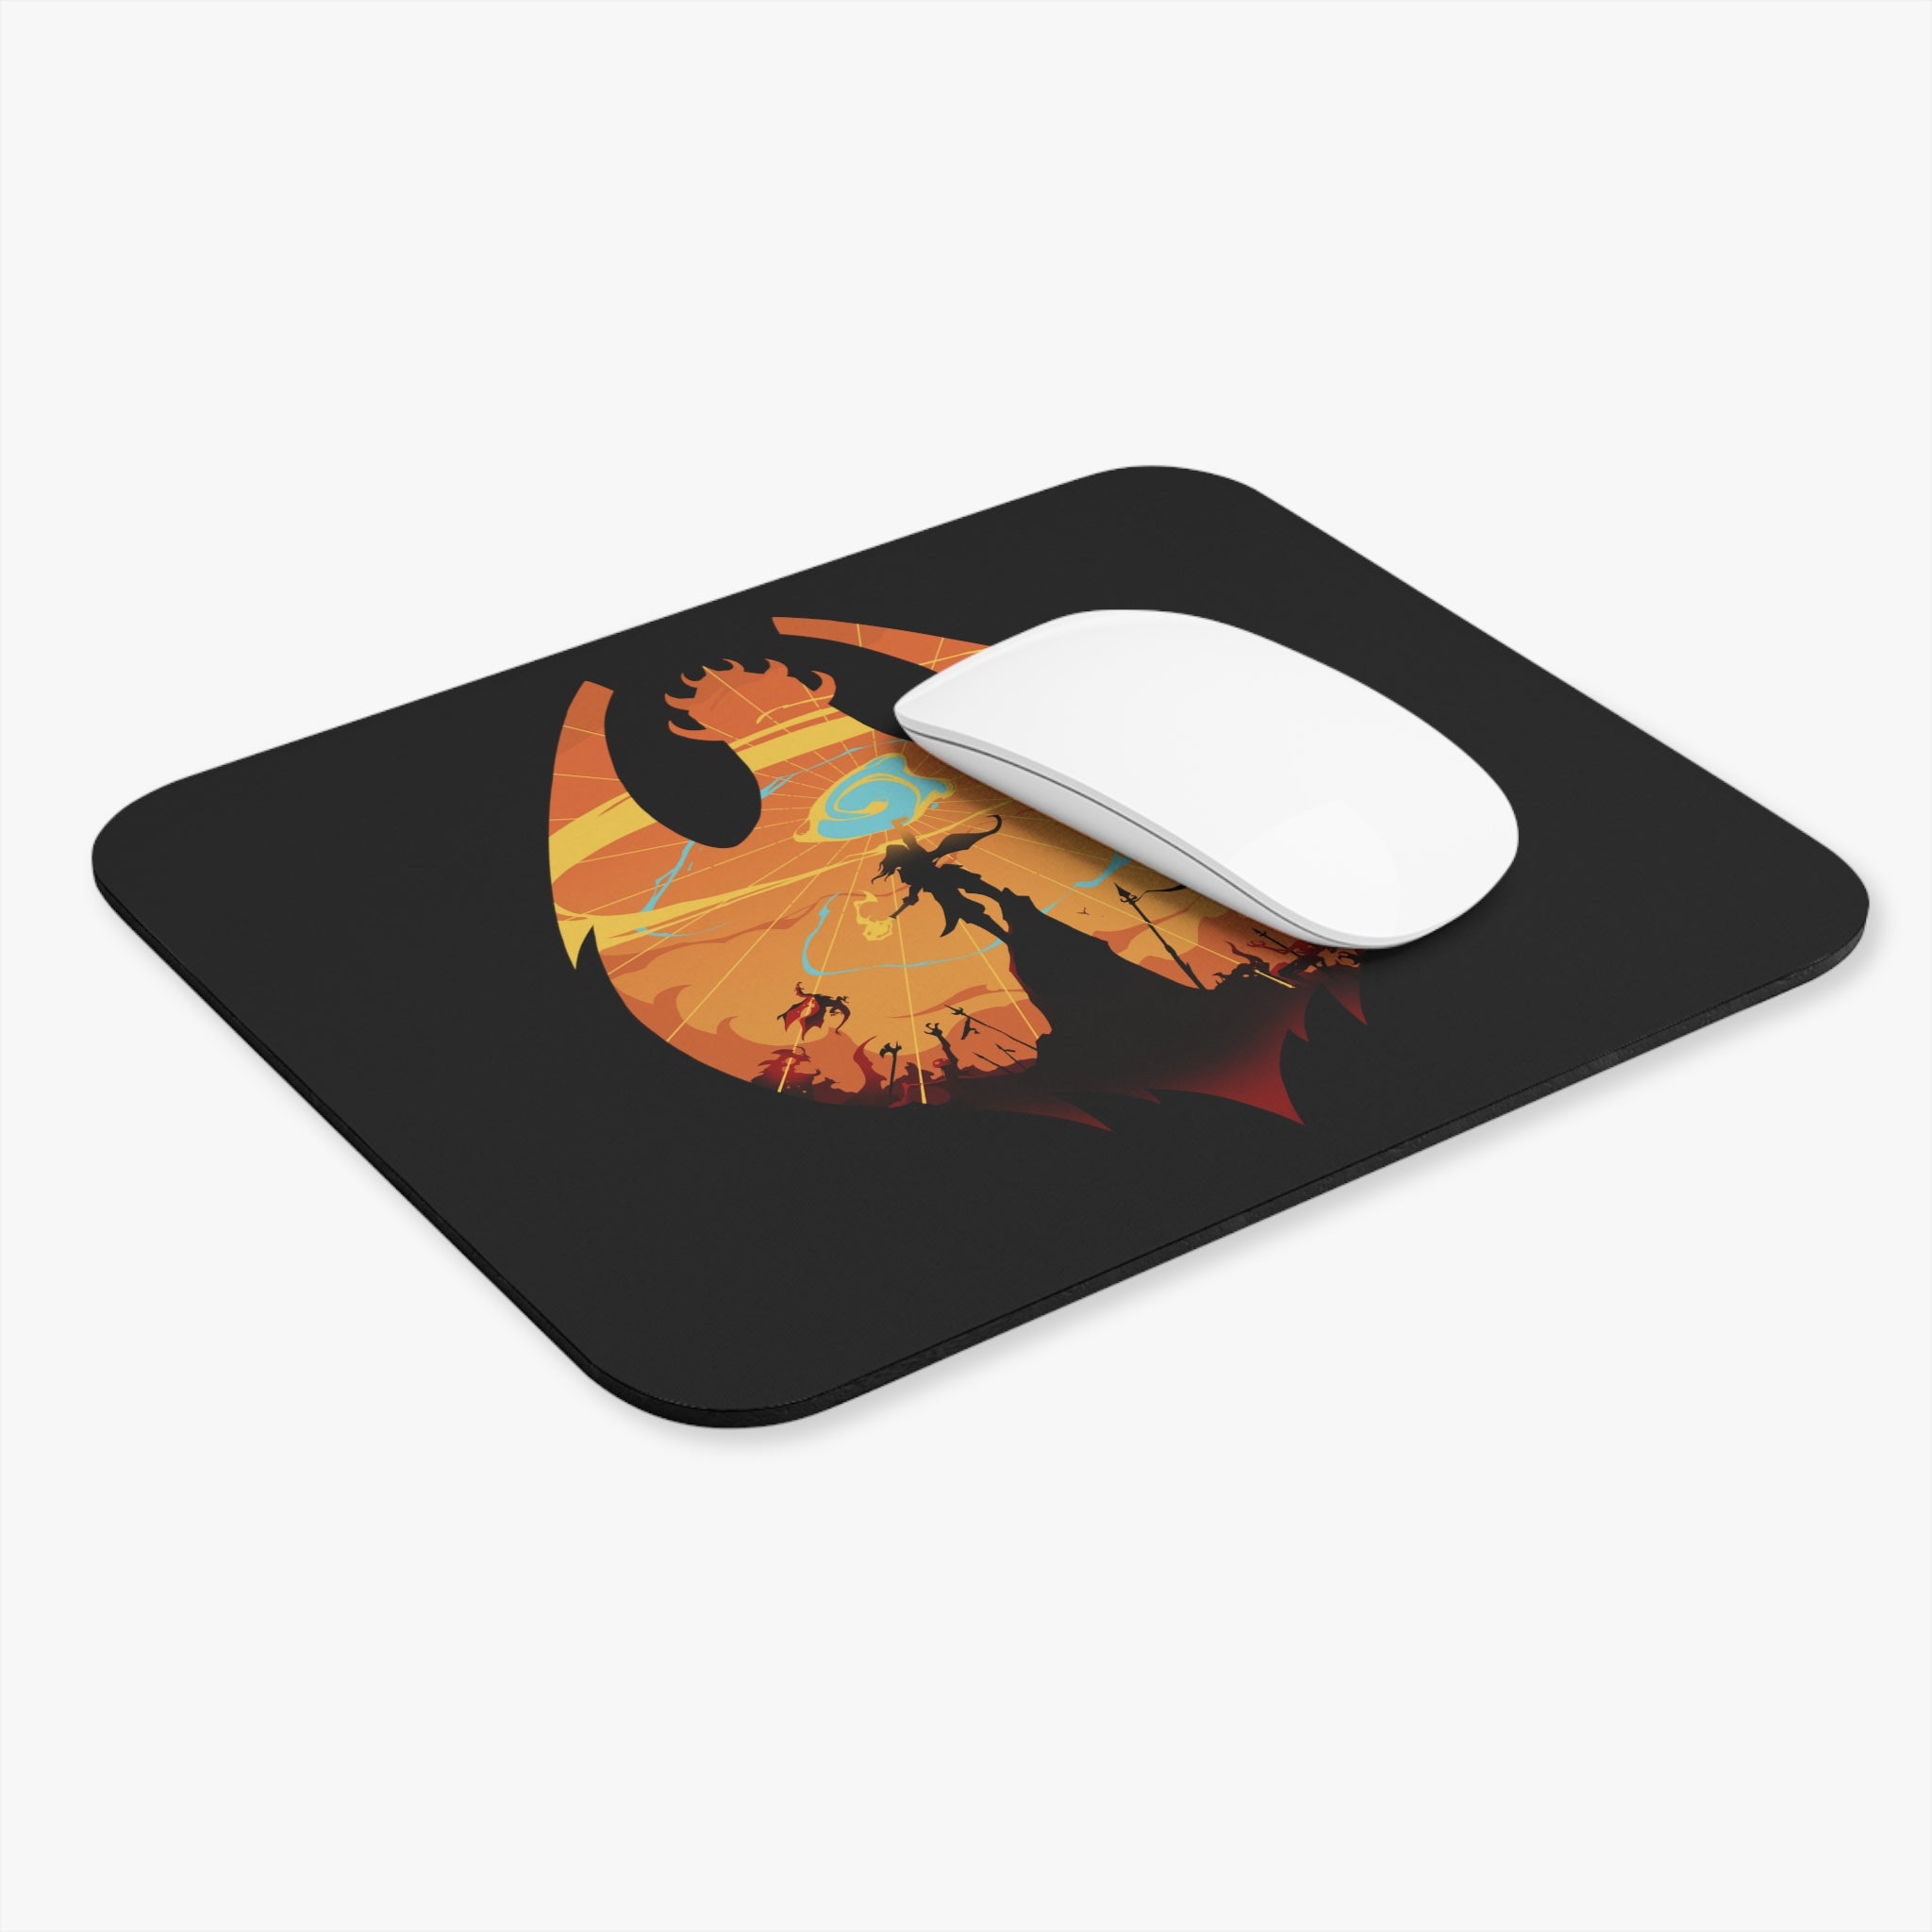 CLERIC CLASS SILHOUETTE RECTANGLER MOUSE PAD